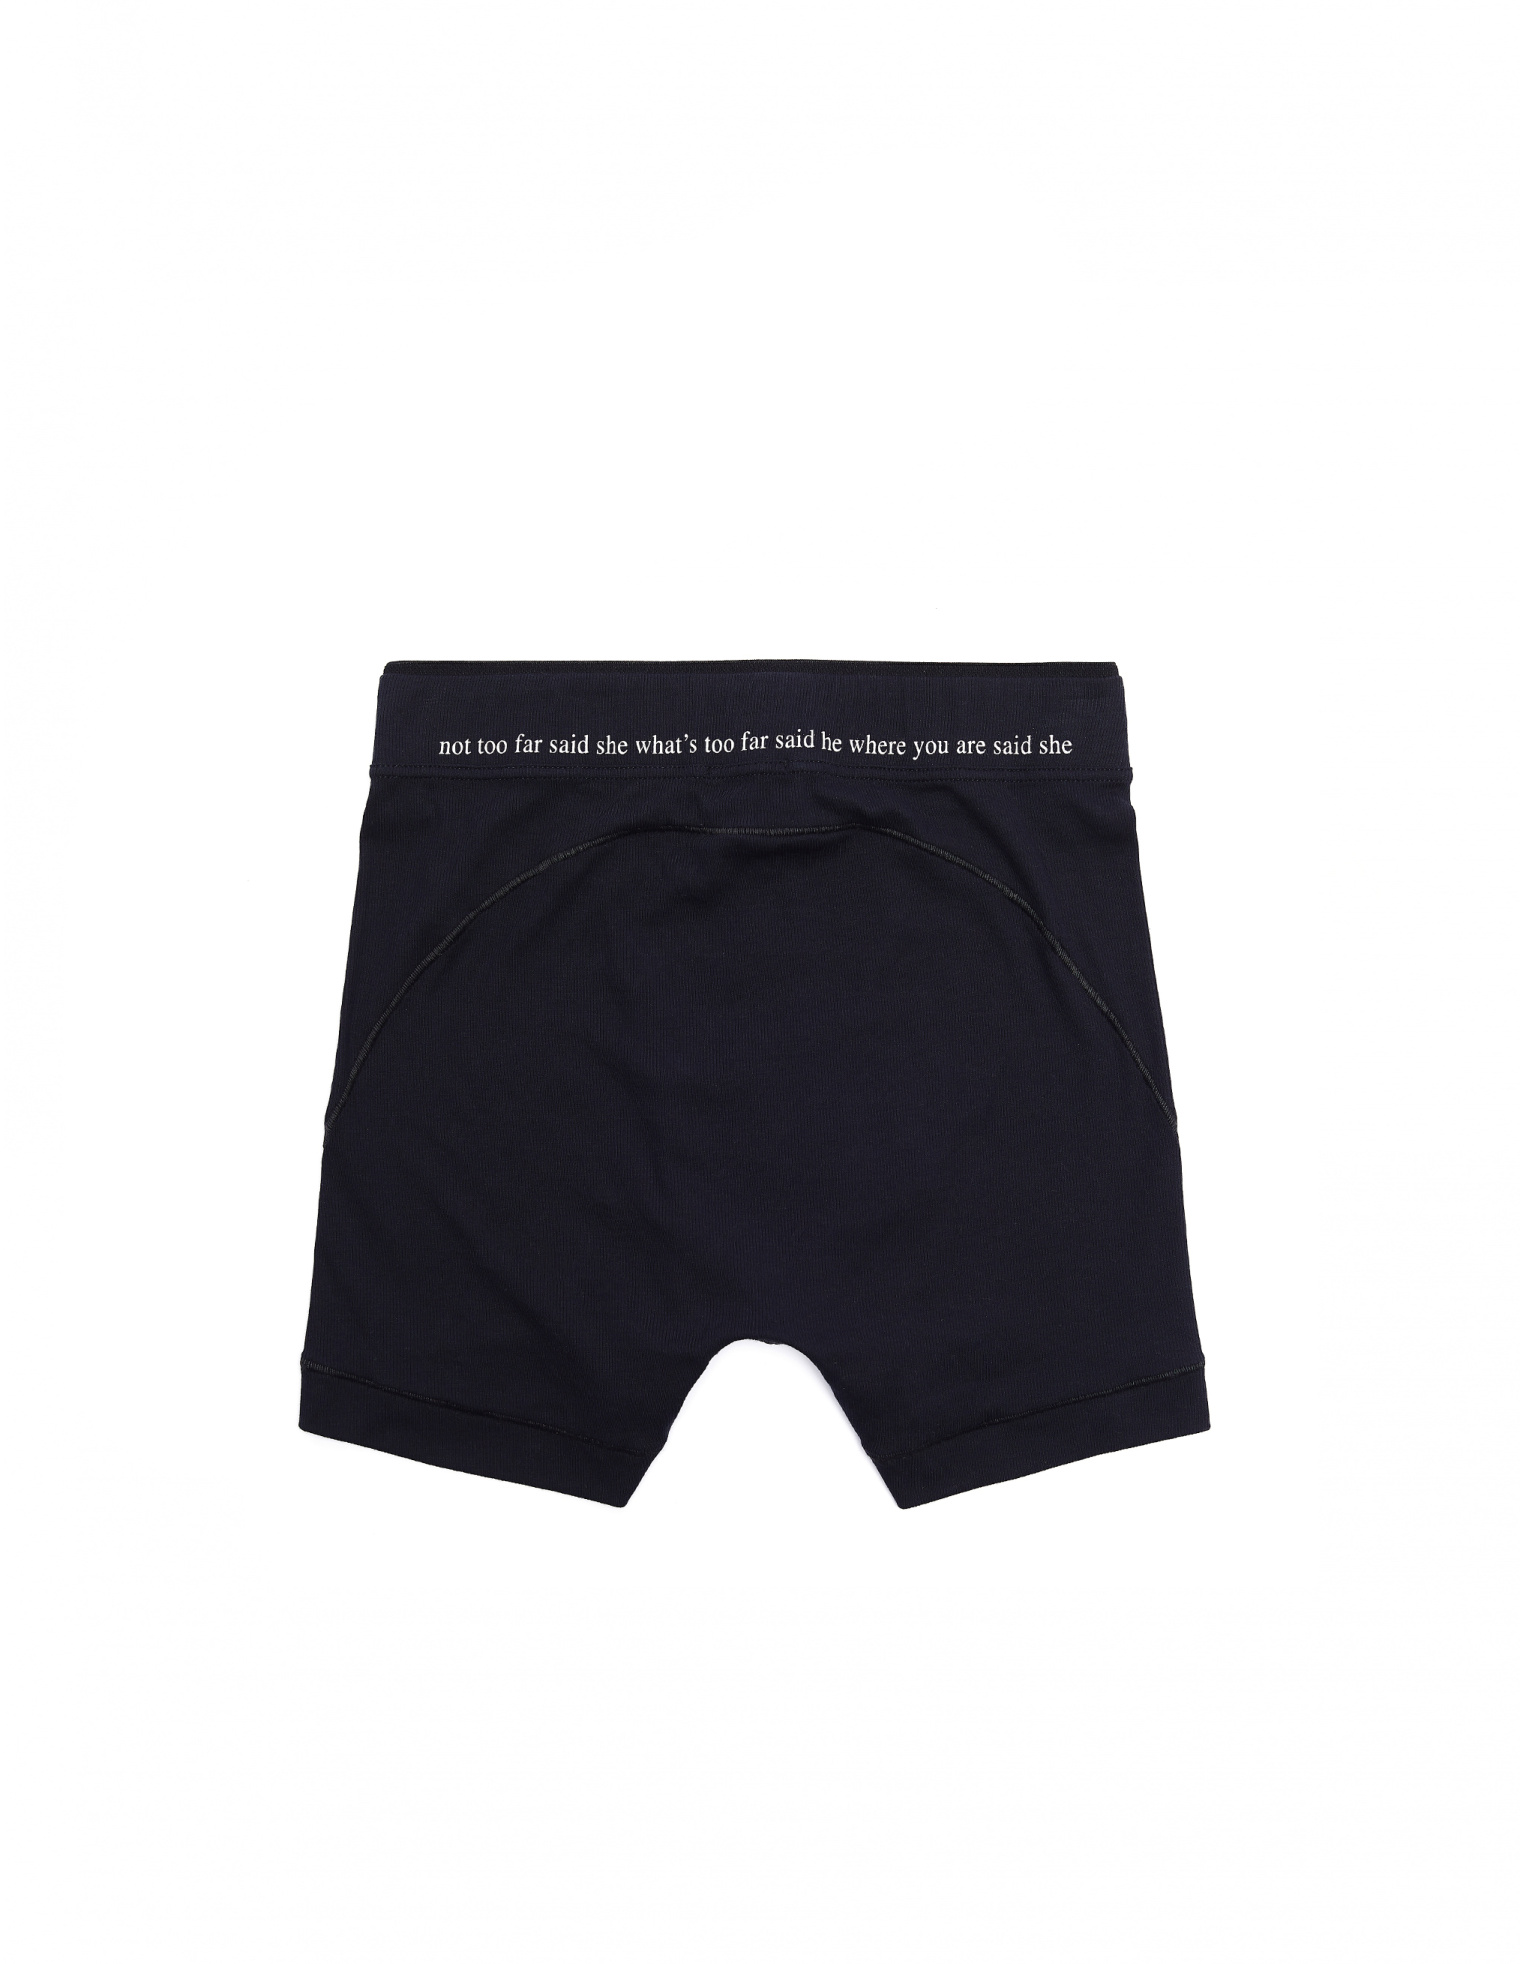 Ann Demeulemeester Boxers With Printed Waist